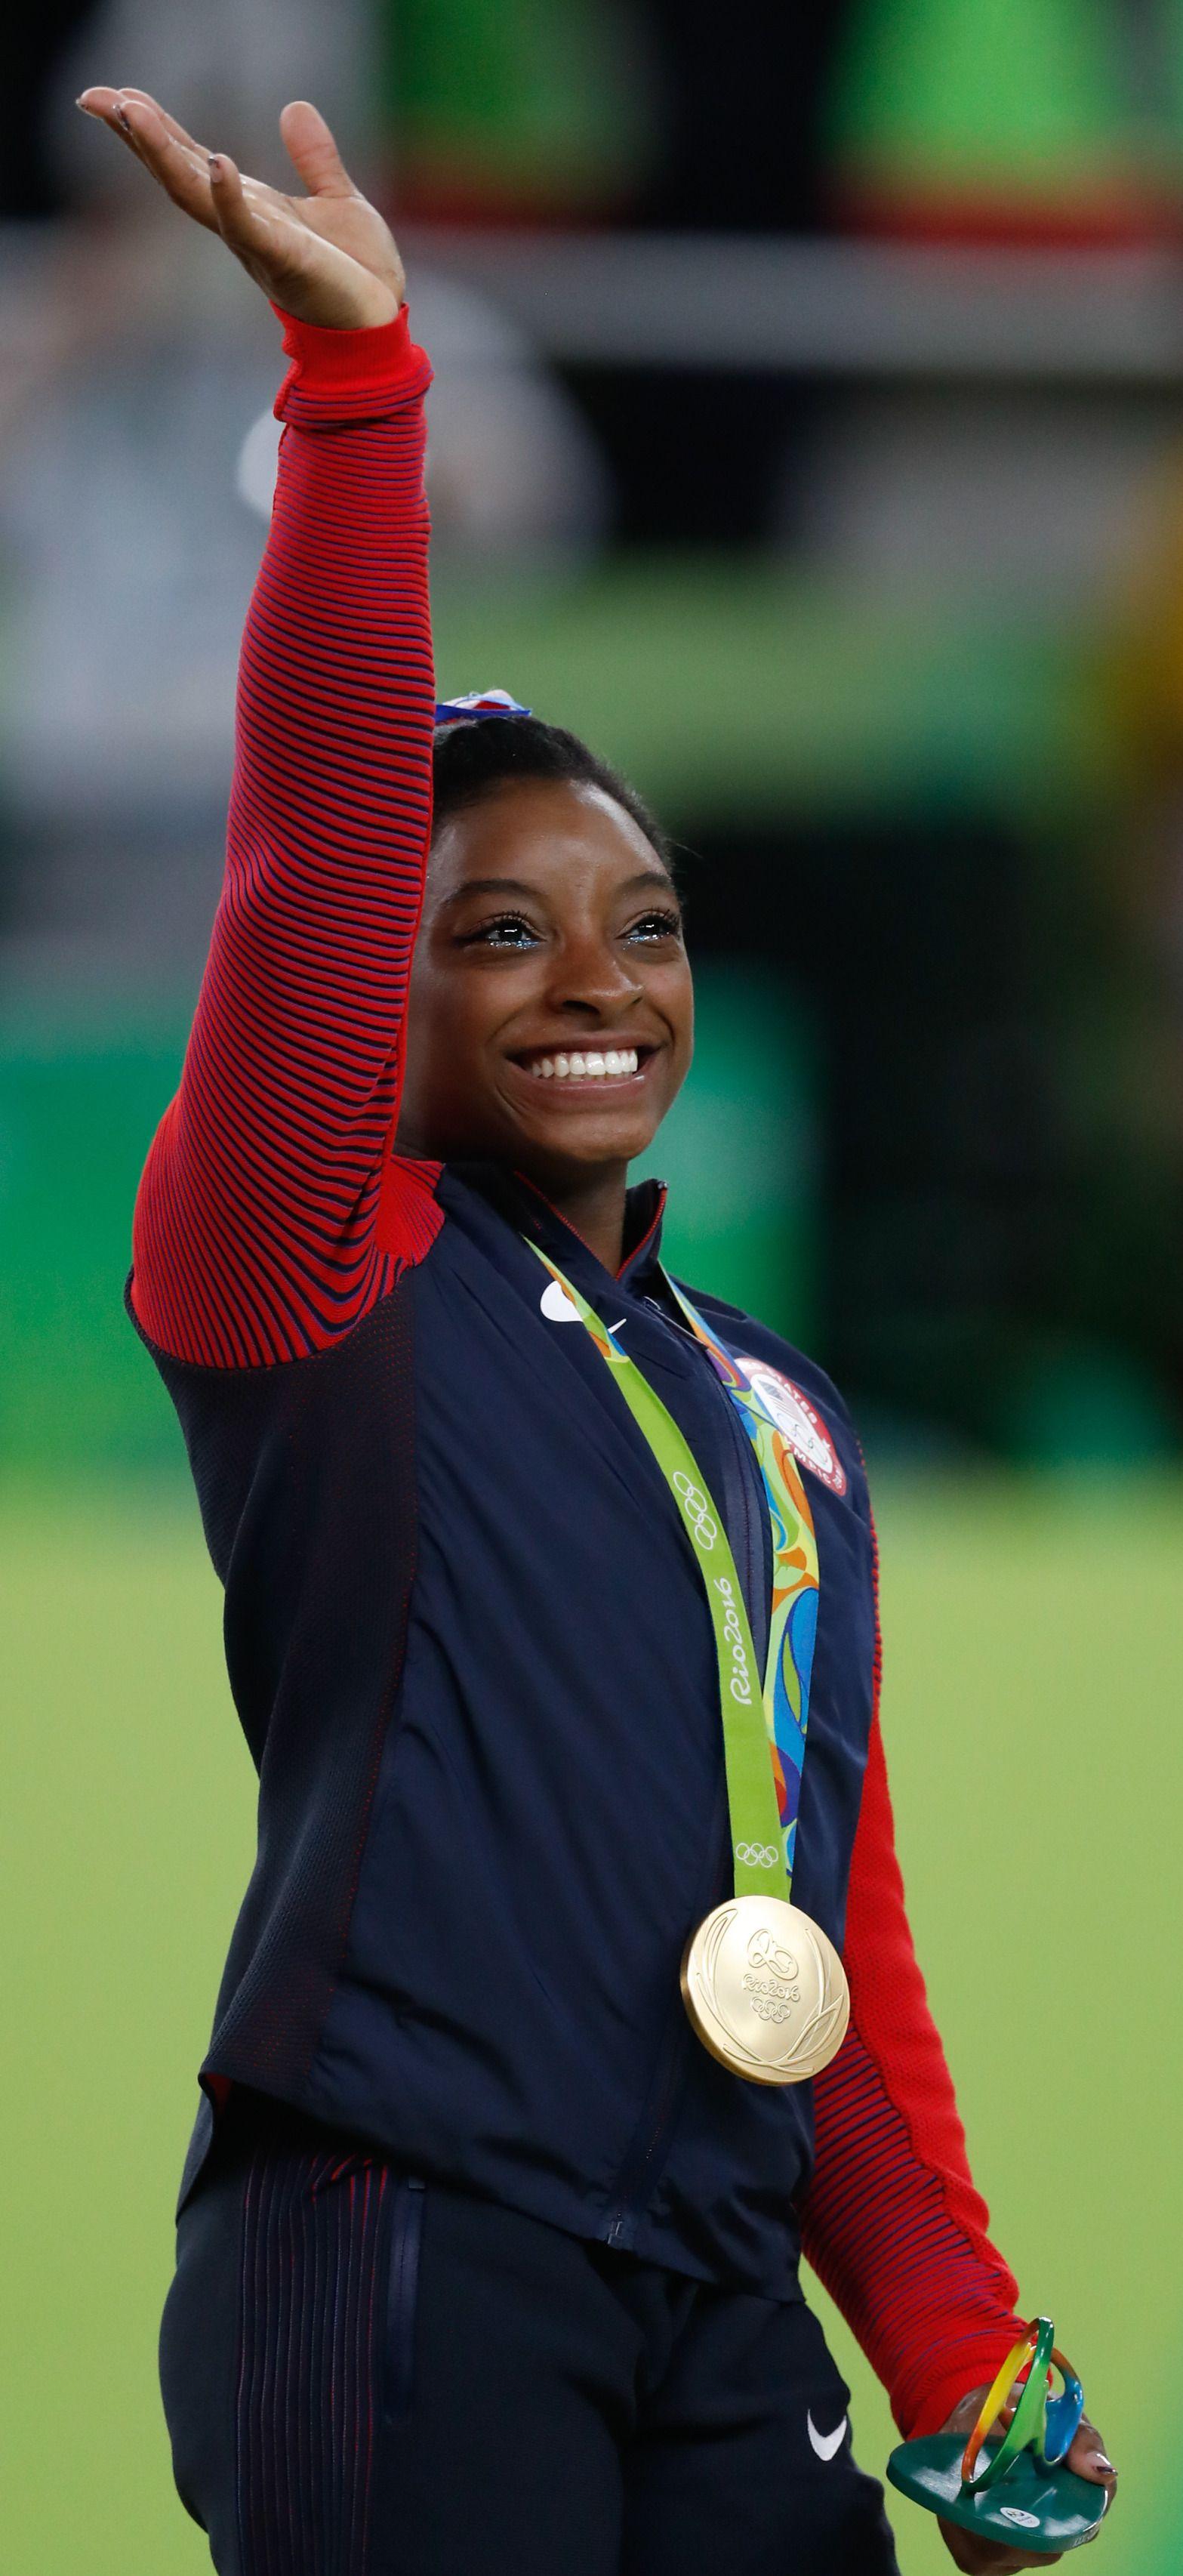 Simone Biles Wins 4th Medal In Rio. The King Of Tickets Blog